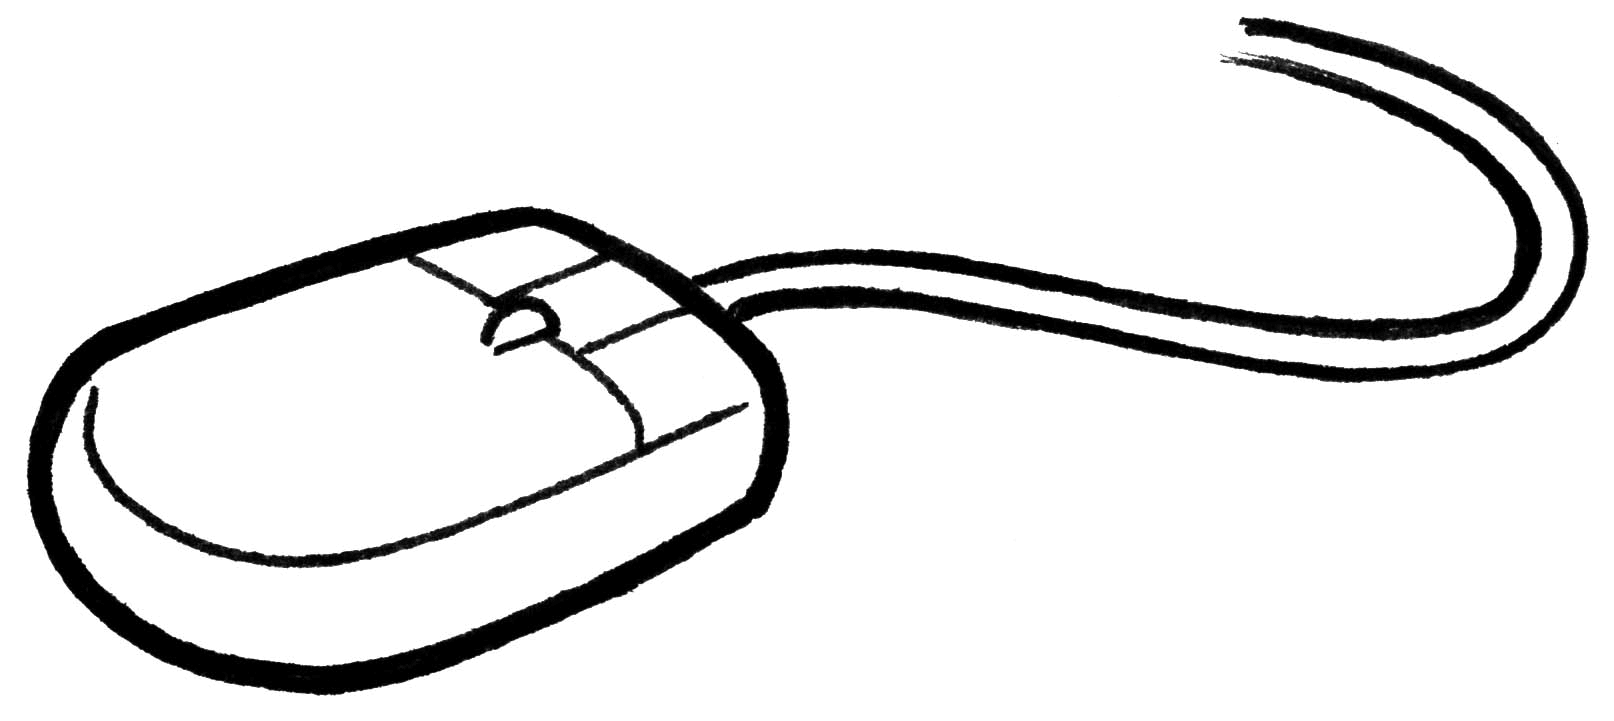 Computer keyboard and mouse clipart